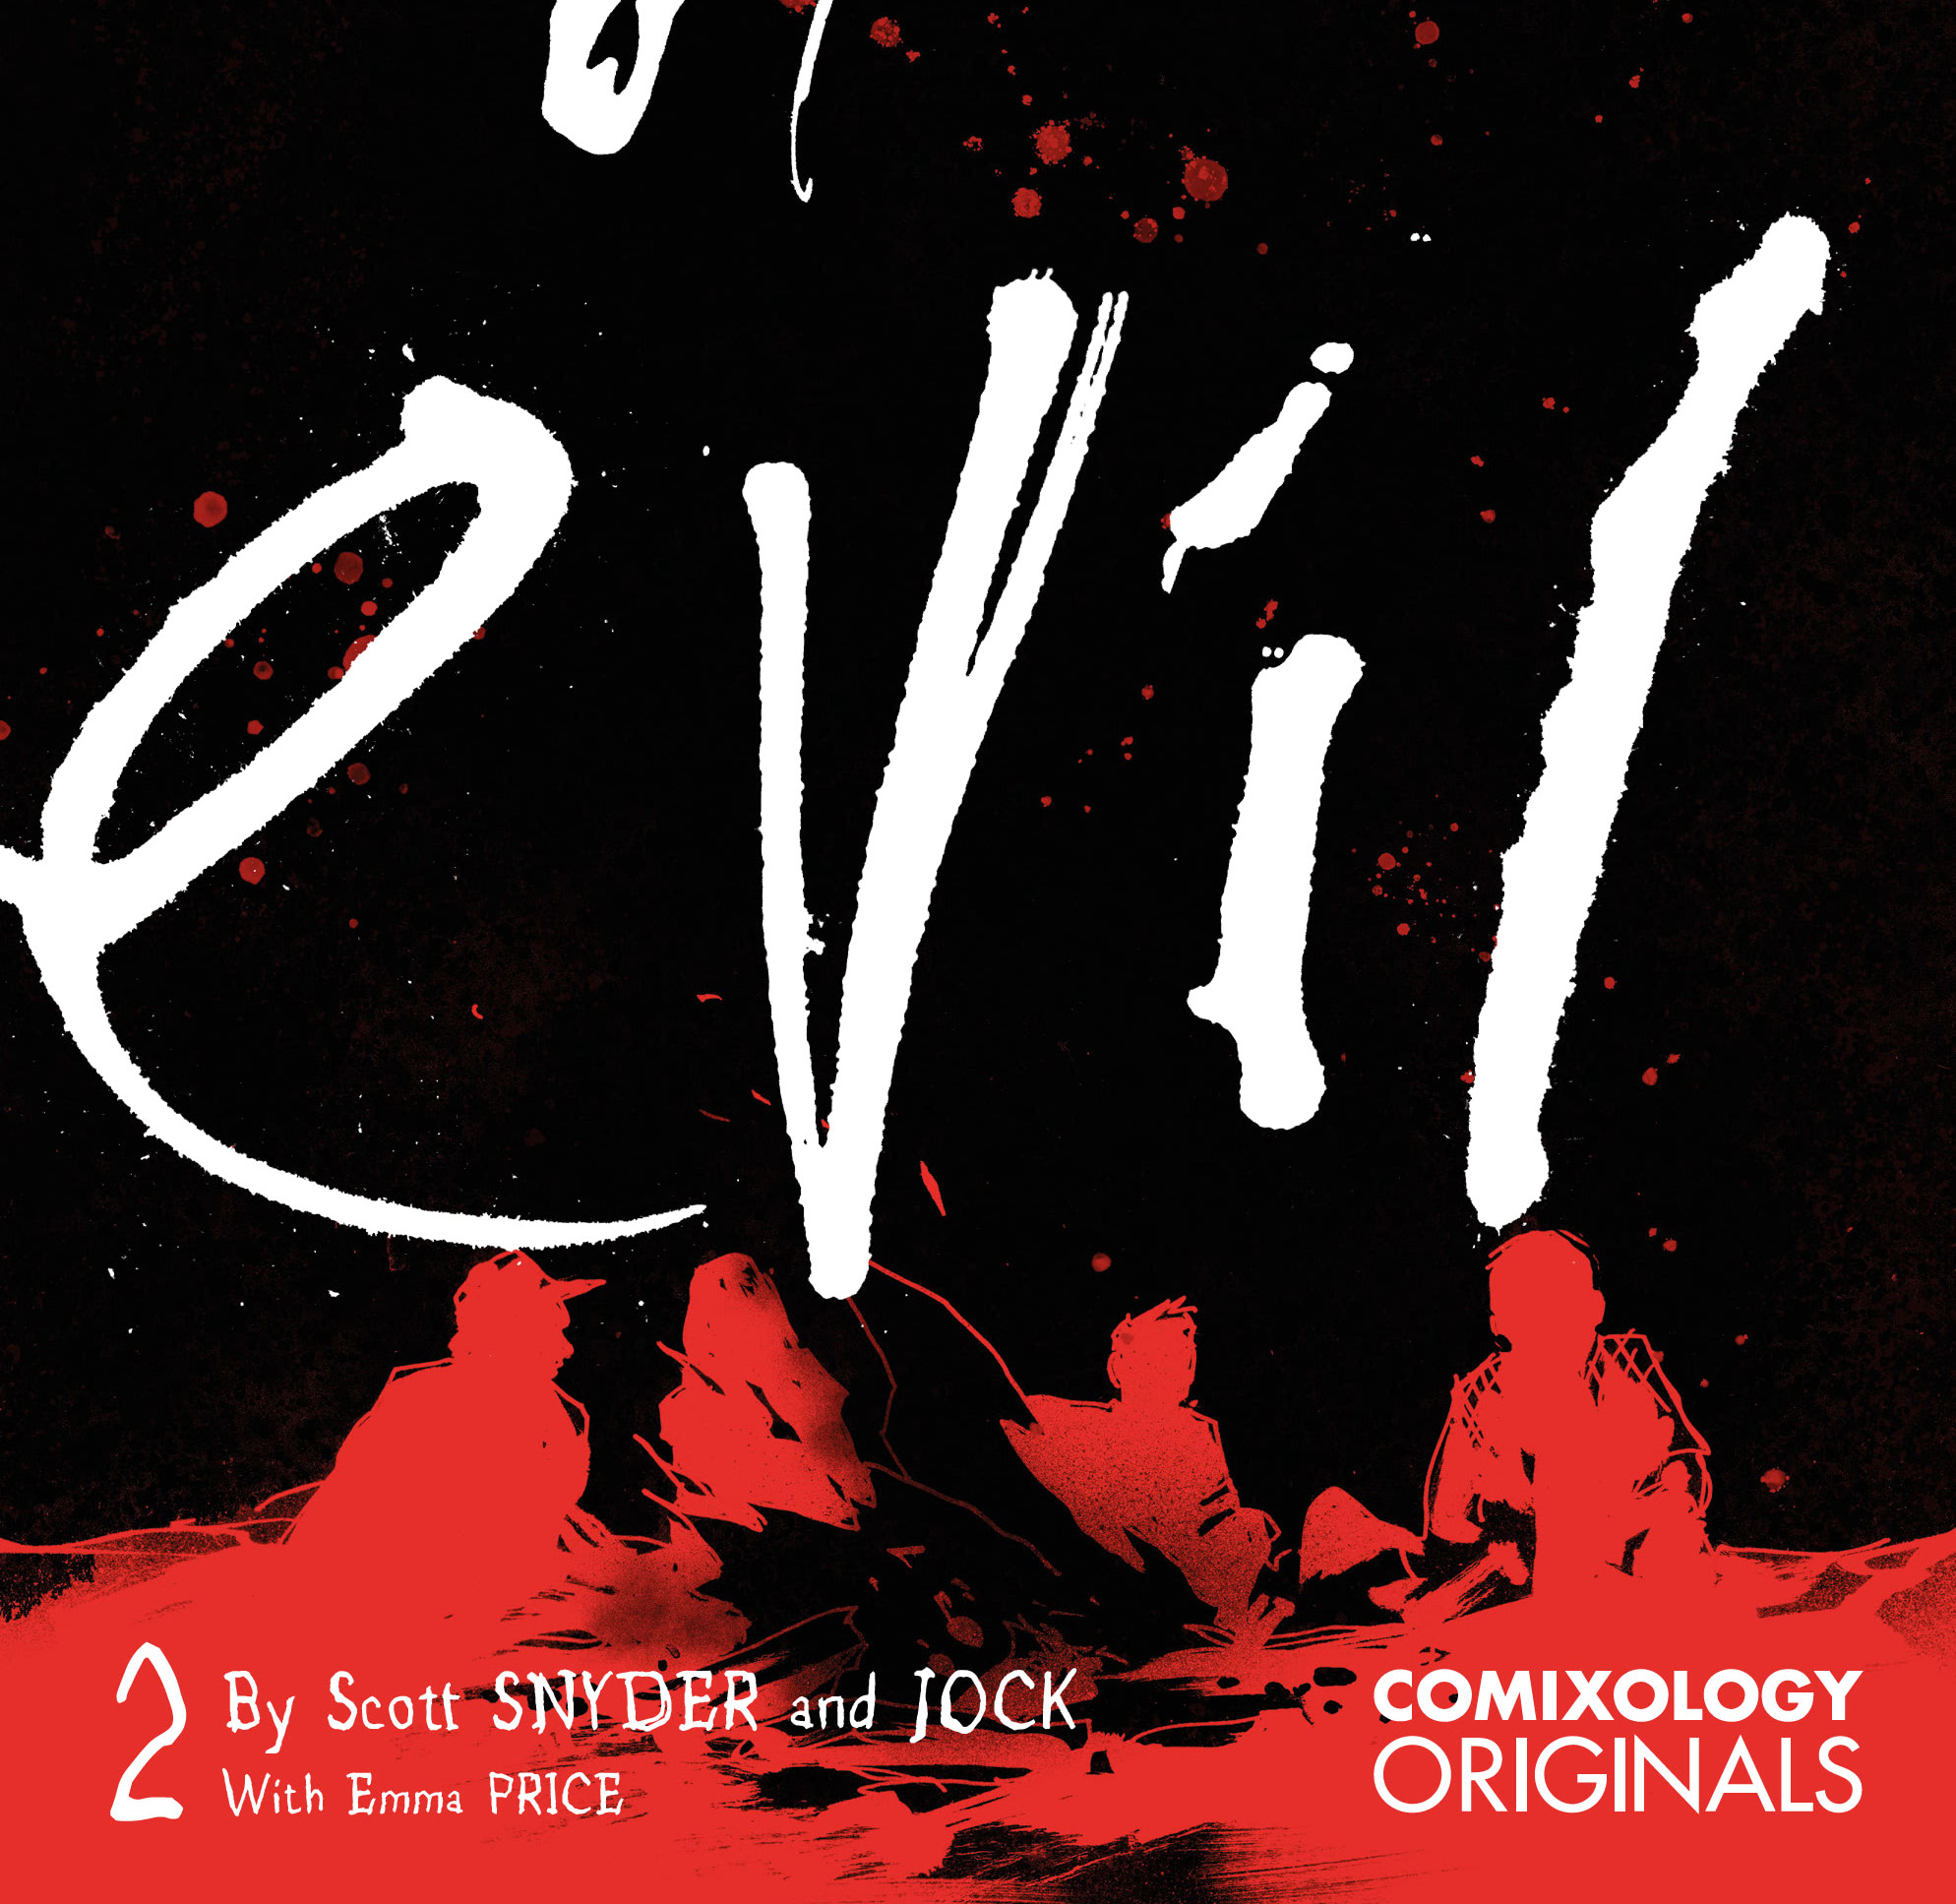 ‘Book of Evil’ #2 haunts and reveals a terrible future ruled by psychopaths